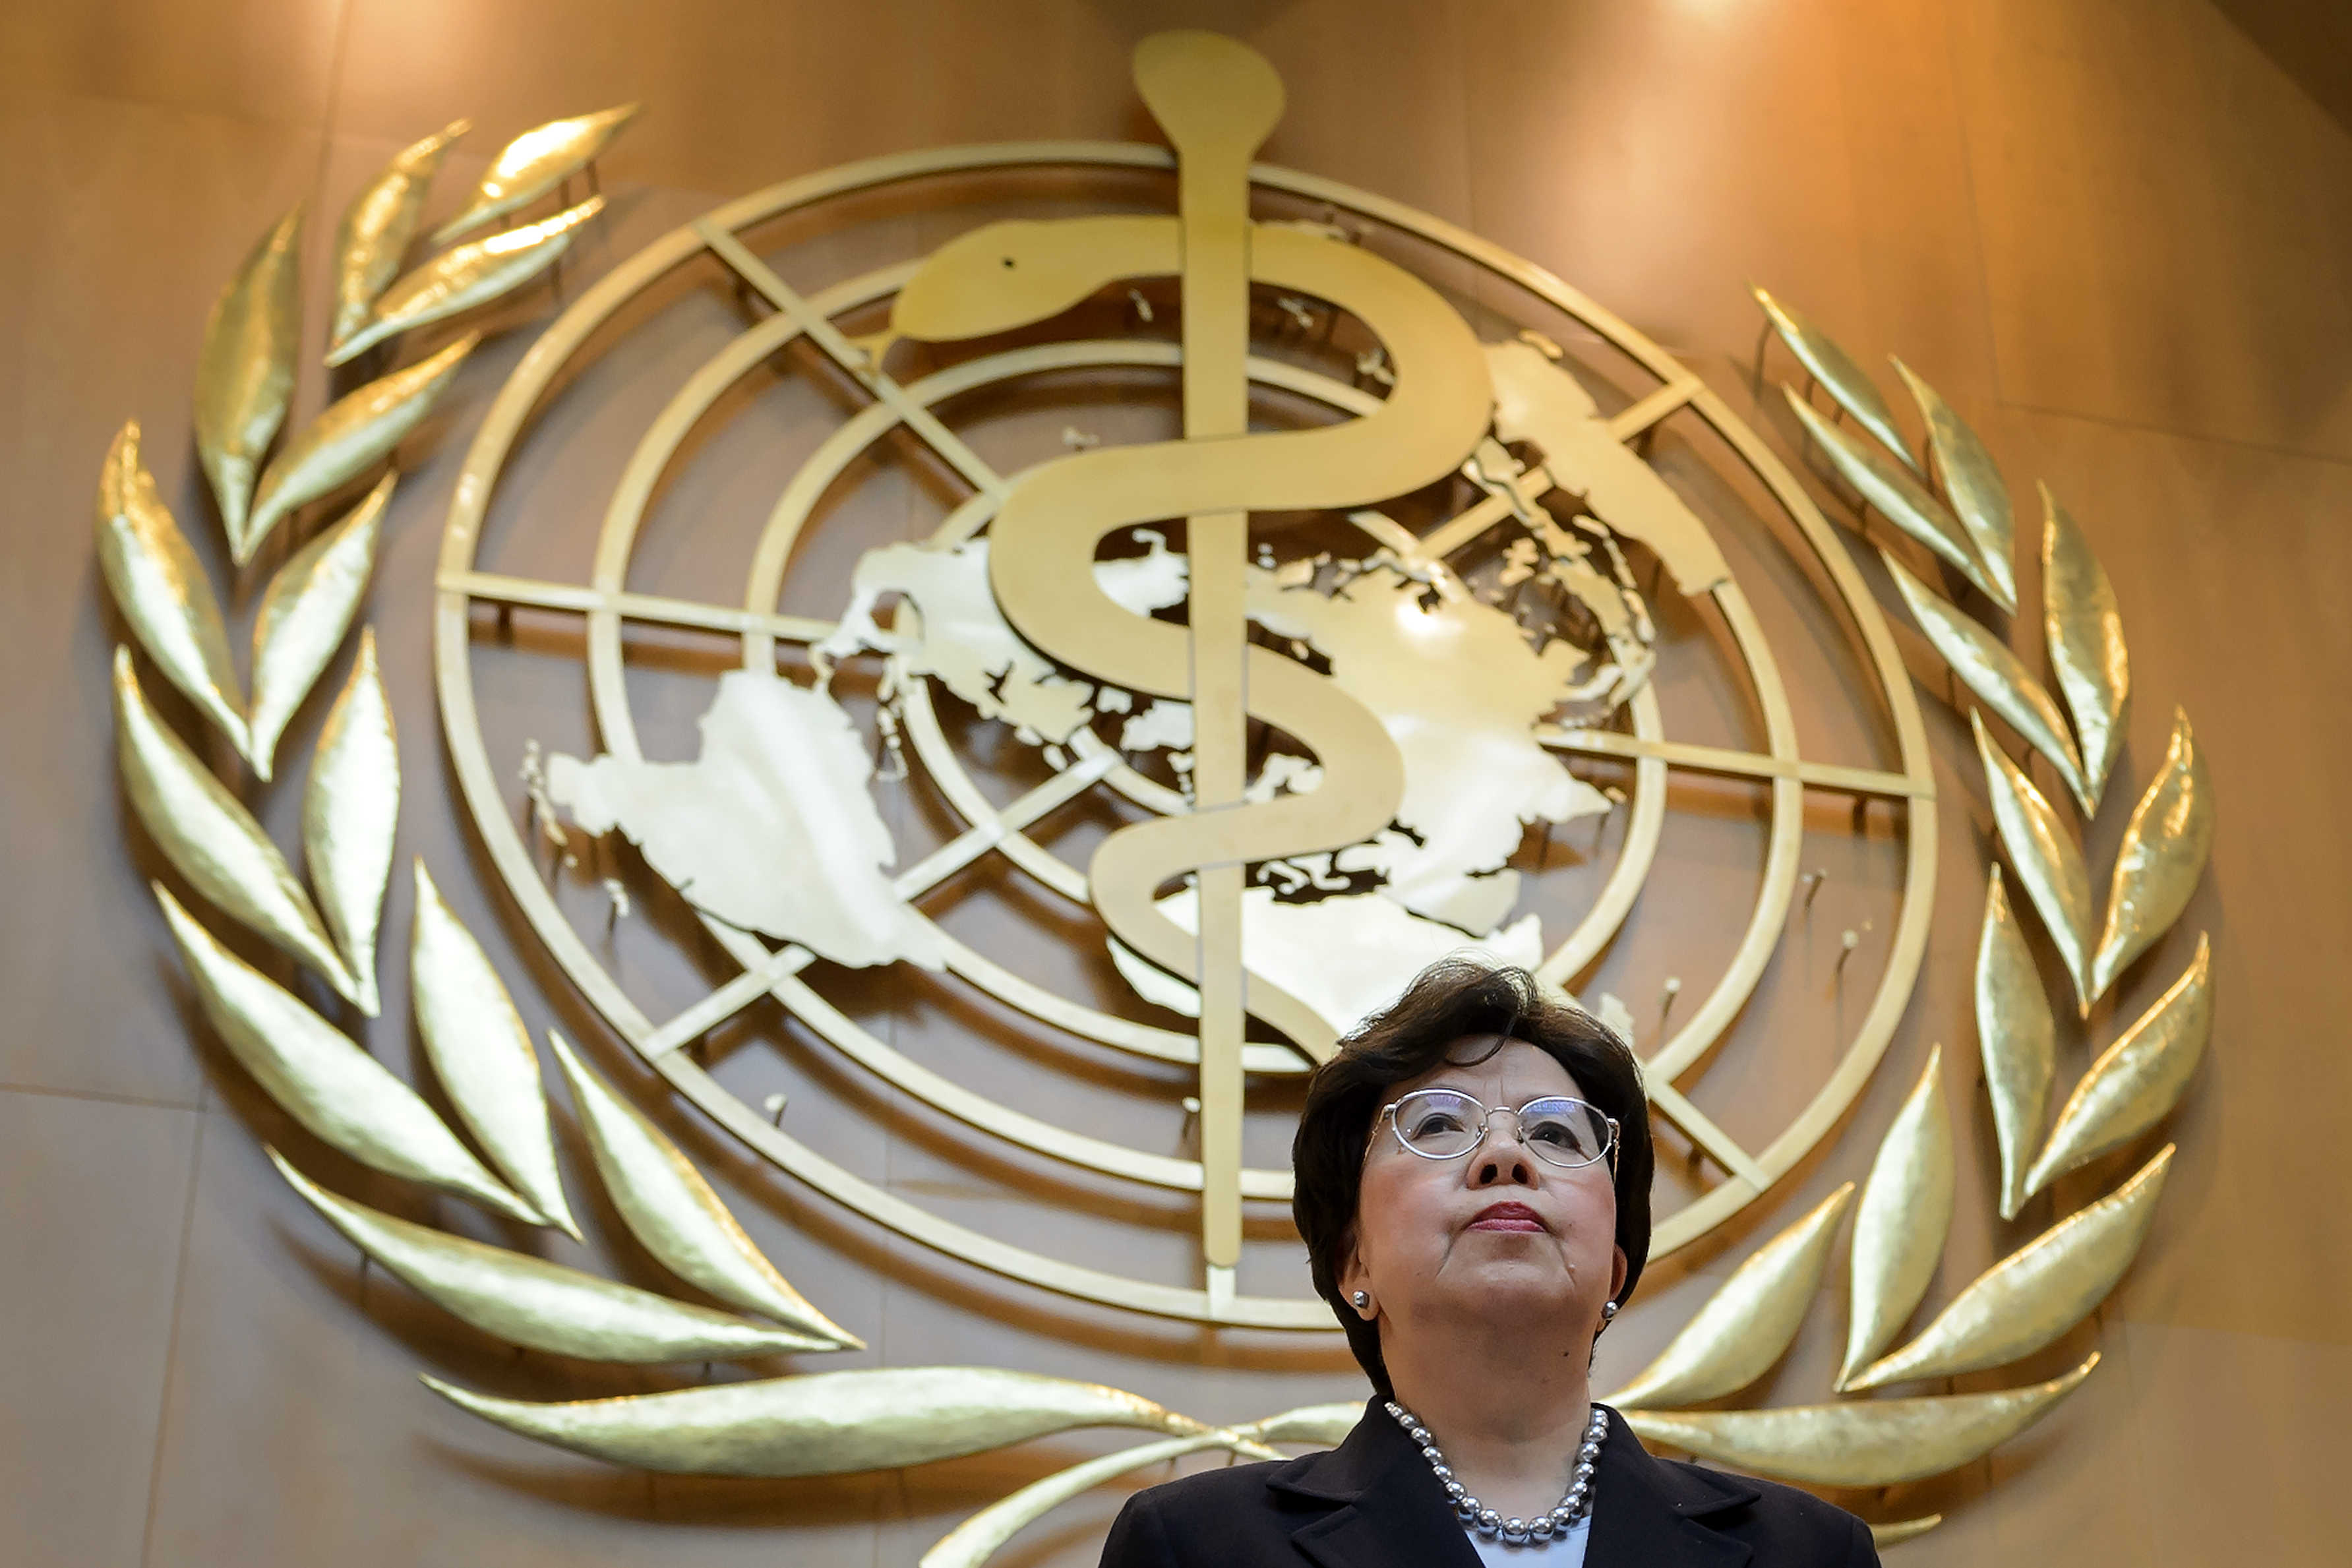 World Health Organization (WHO) Director-General Margaret Chan stands under the logo of the specialized agency of the United Nations after she addressed the WHO general assembly on May 18, 2015 in Geneva.  AFP PHOTO / FABRICE COFFRINI / AFP PHOTO / FABRICE COFFRINI